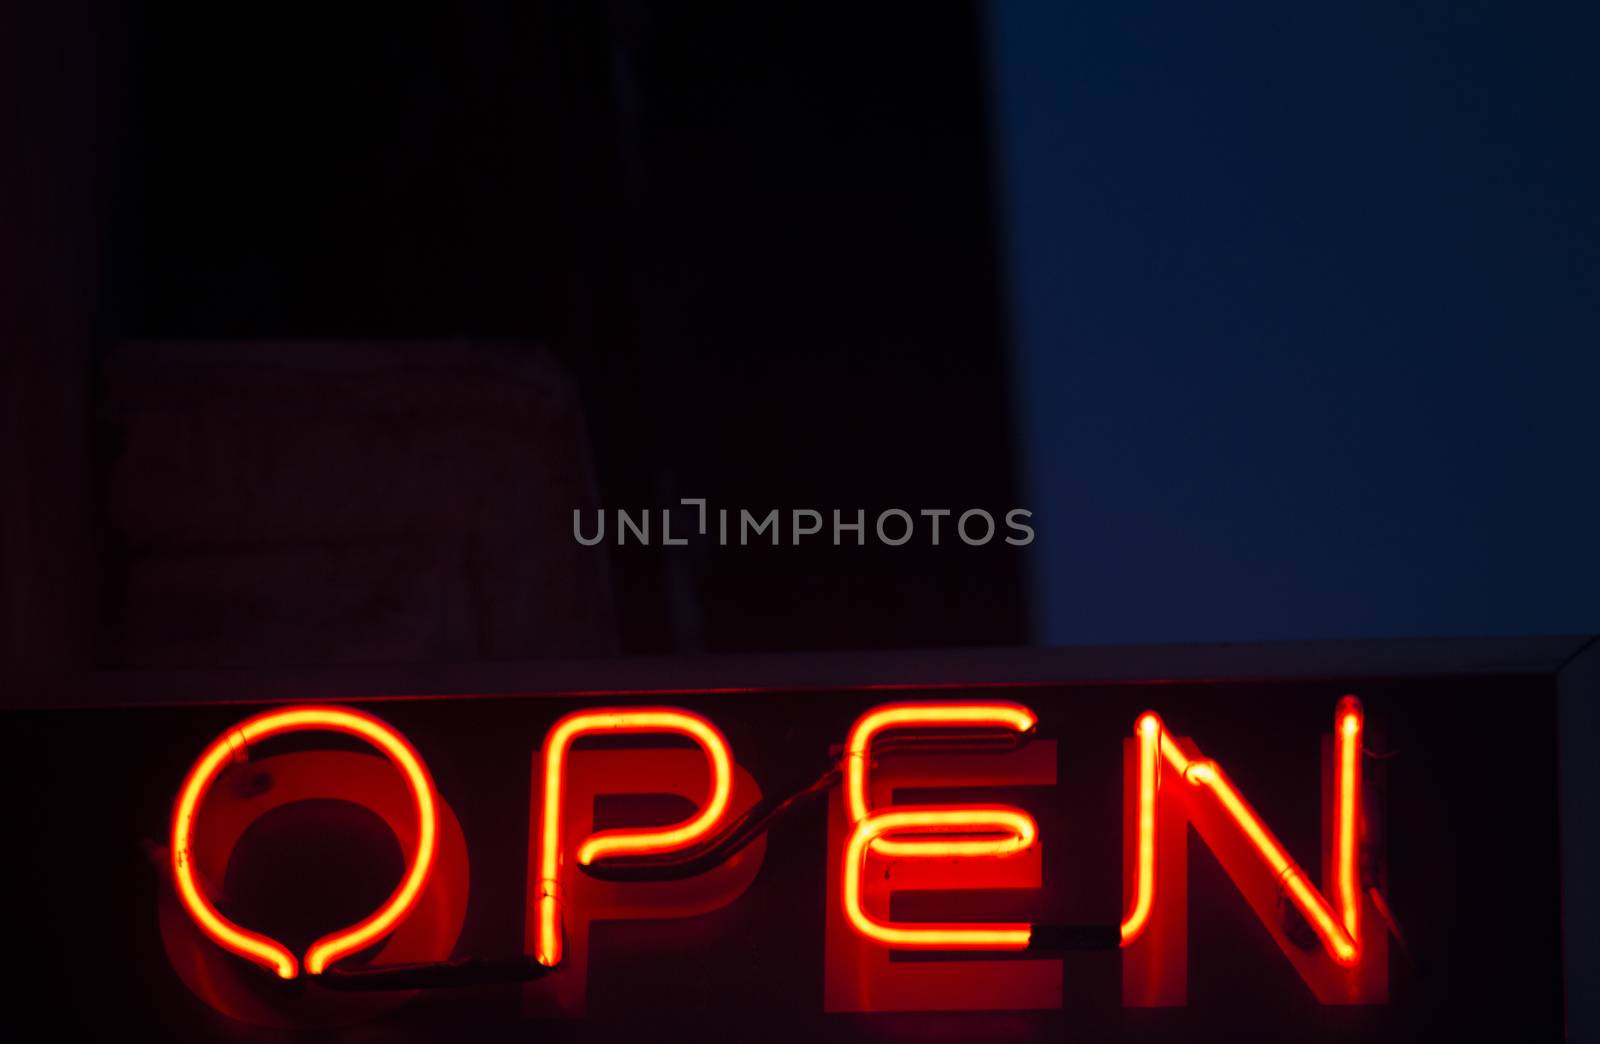 Neon open sign at night in street photo.